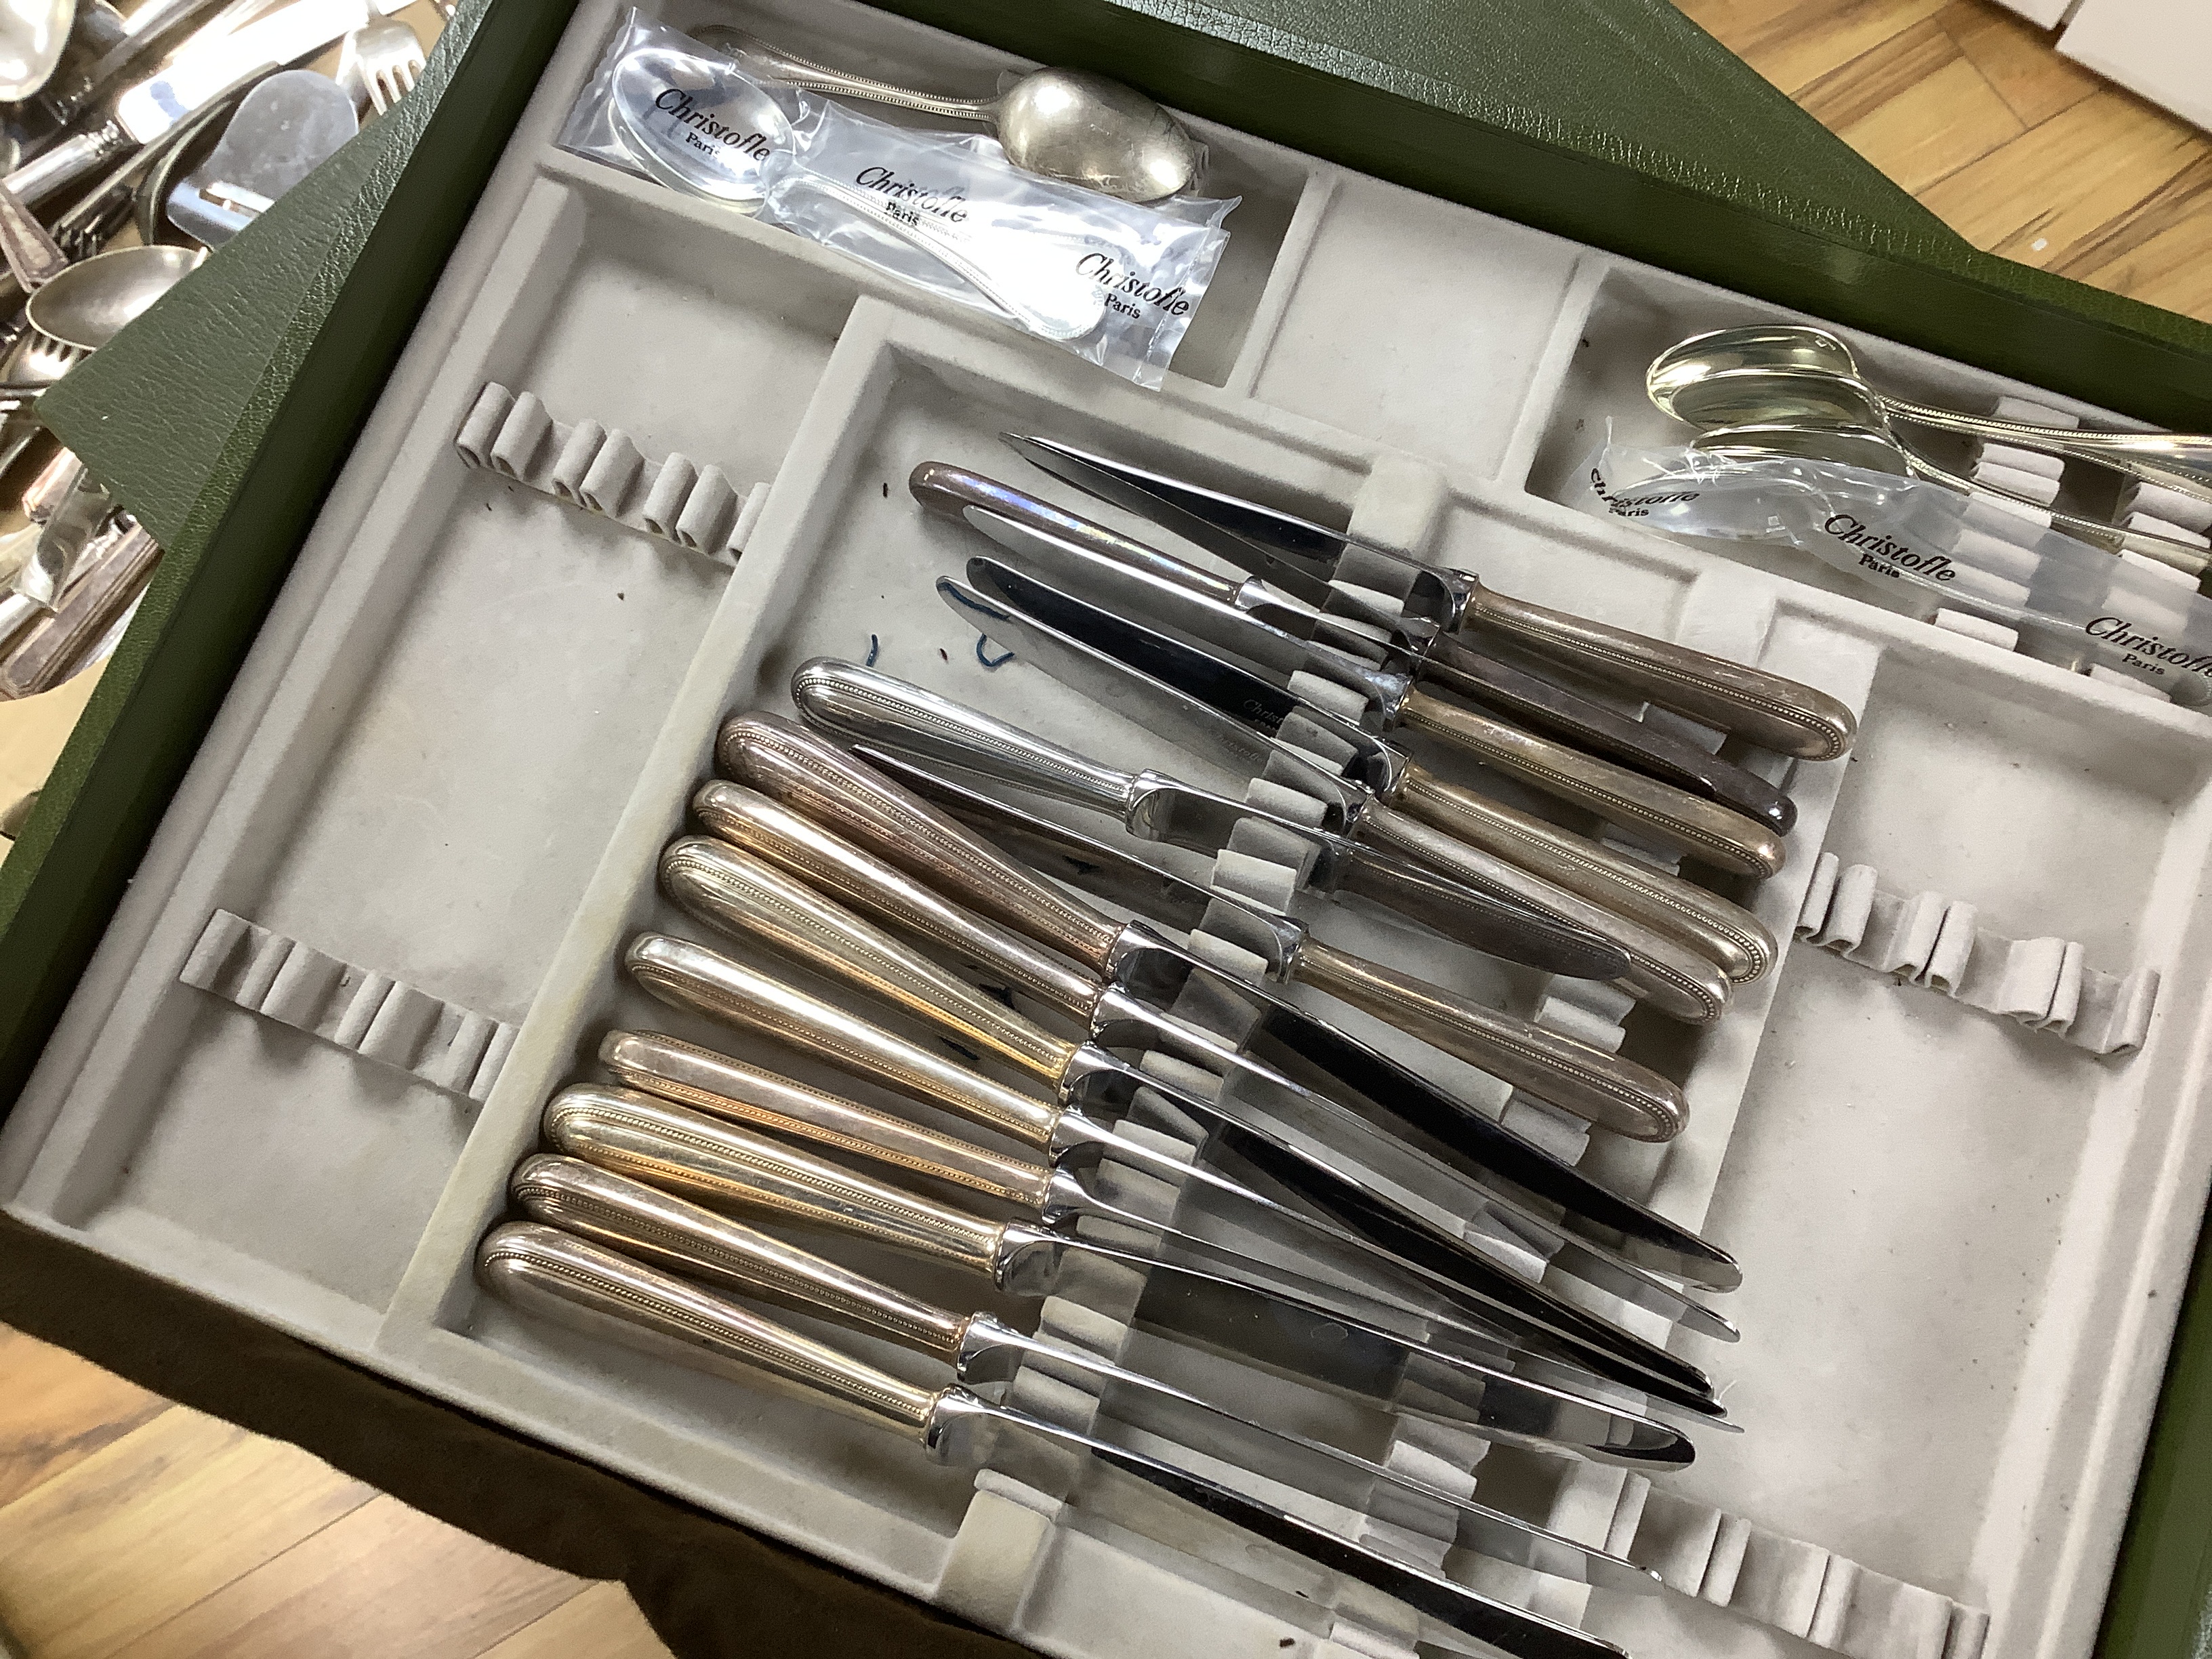 A Christofle suite of cutlery together with other cutlery